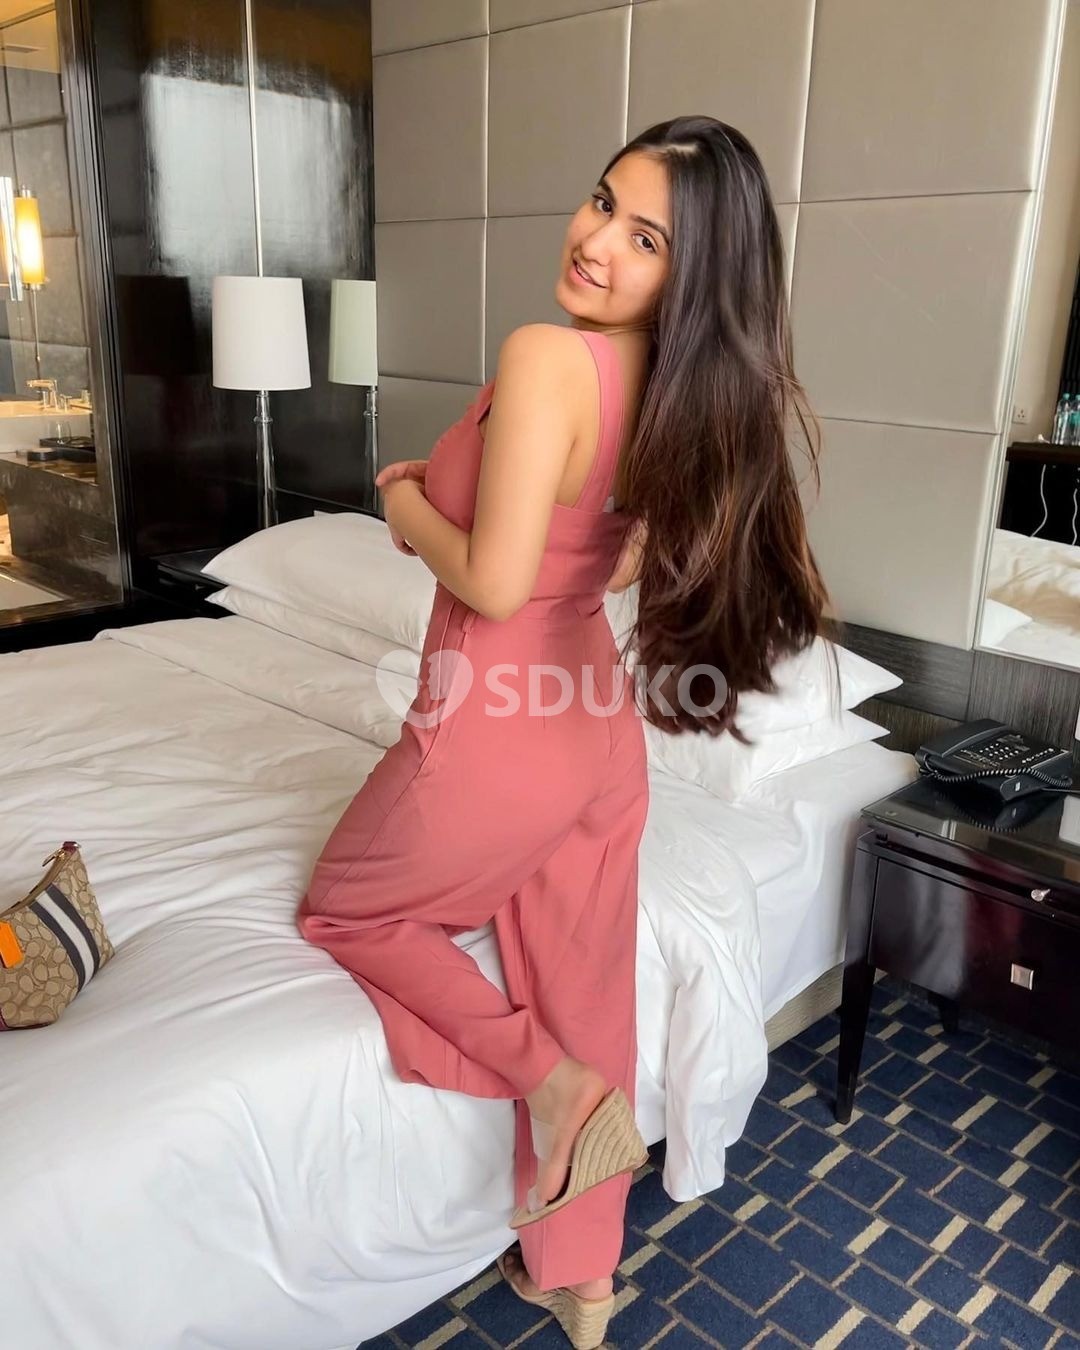 Dadar     ✅ 24x7 AFFORDABLE CHEAPEST RATE SAFE CALL GIRL SERVICE AVAILABLE OUTCALL AVAILABLE.......